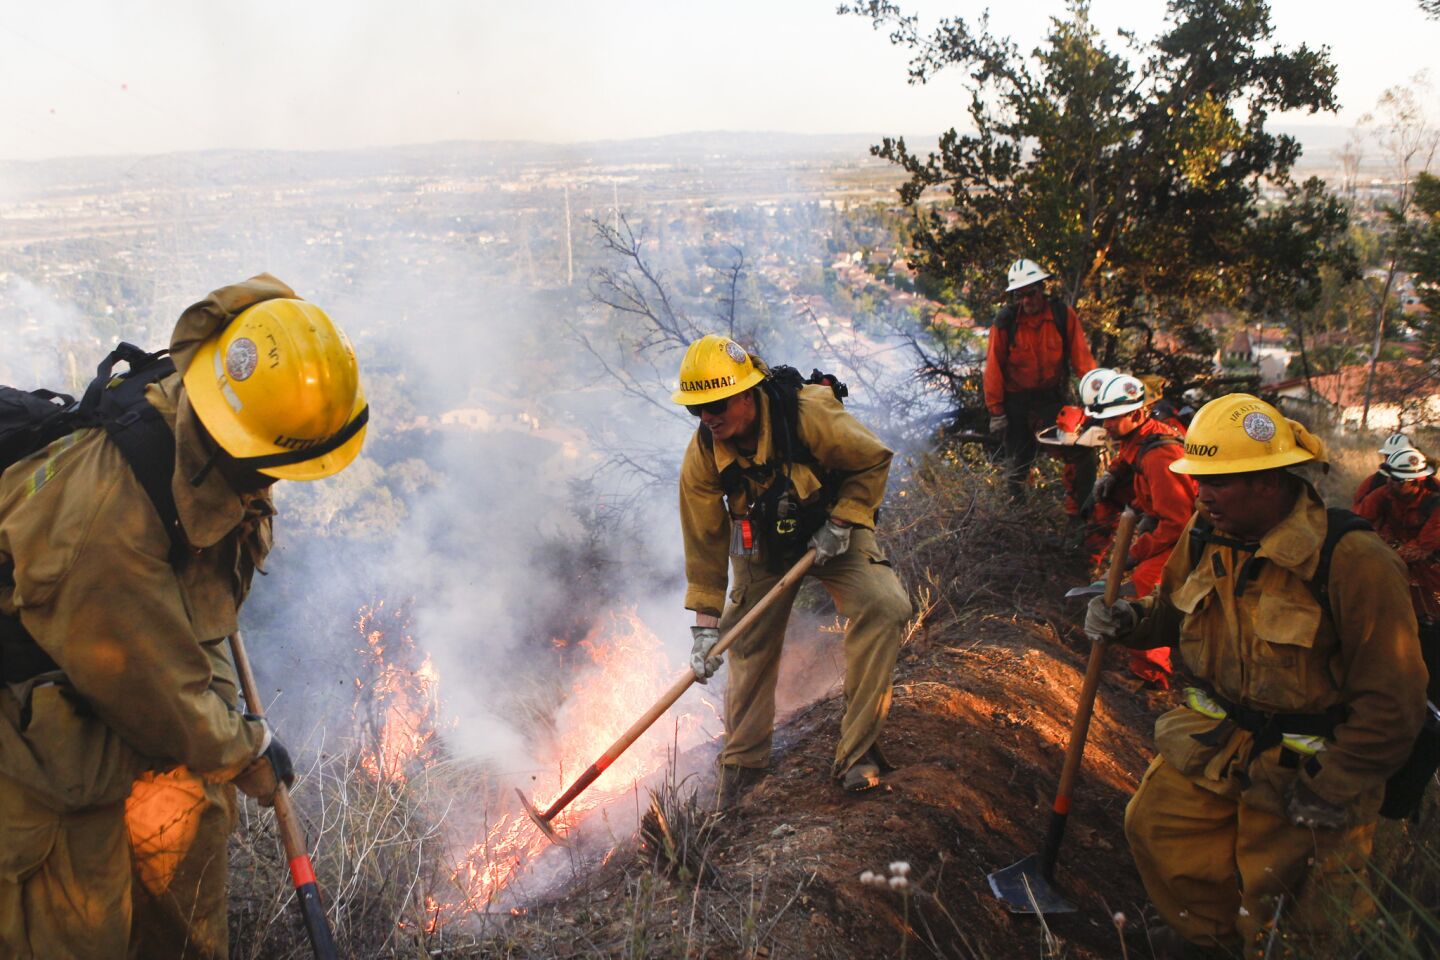 Los Angeles County firefighters work with prison crews to put out hot spots in the Fish fire burning in the hills above Duarte on Monday.